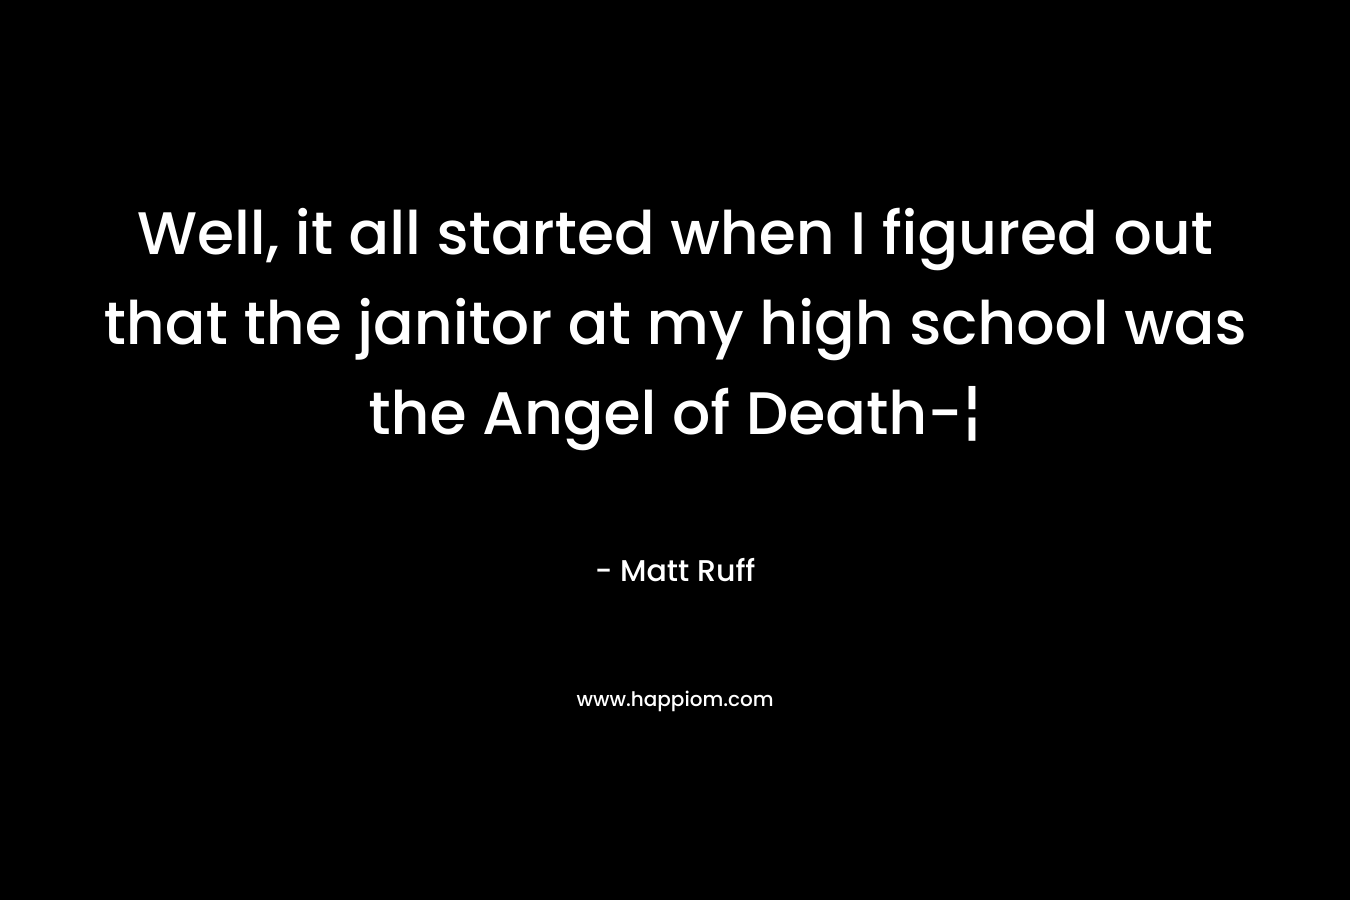 Well, it all started when I figured out that the janitor at my high school was the Angel of Death-¦